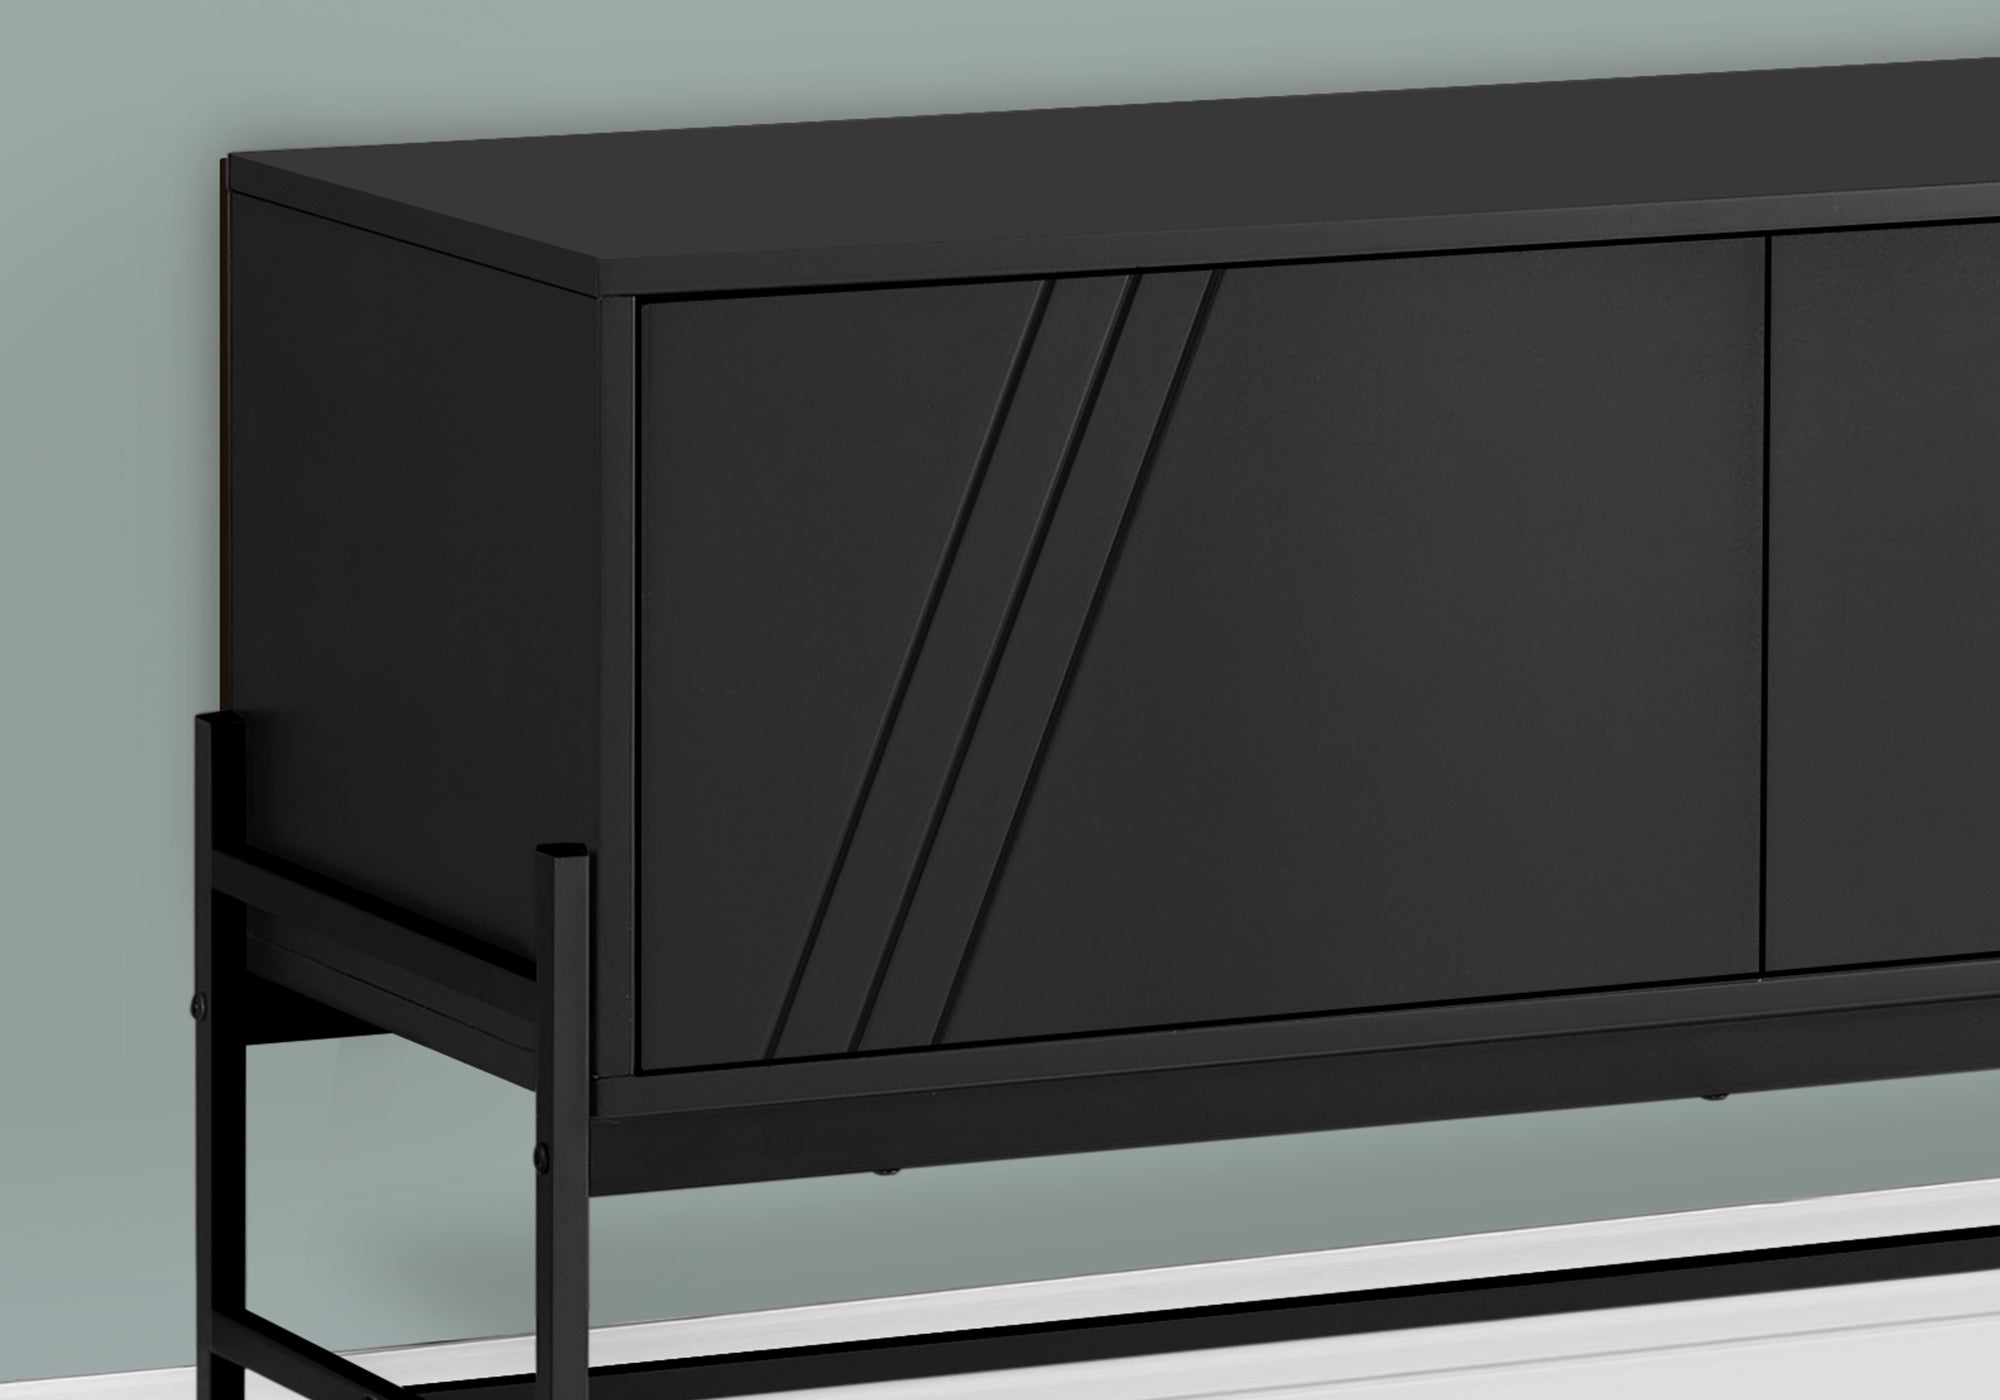 MN-642734    Tv Stand, 60 Inch, Console, Media Entertainment Center, Storage Cabinet, Living Room, Bedroom, Black Laminate, Black Metal, Contemporary, Modern